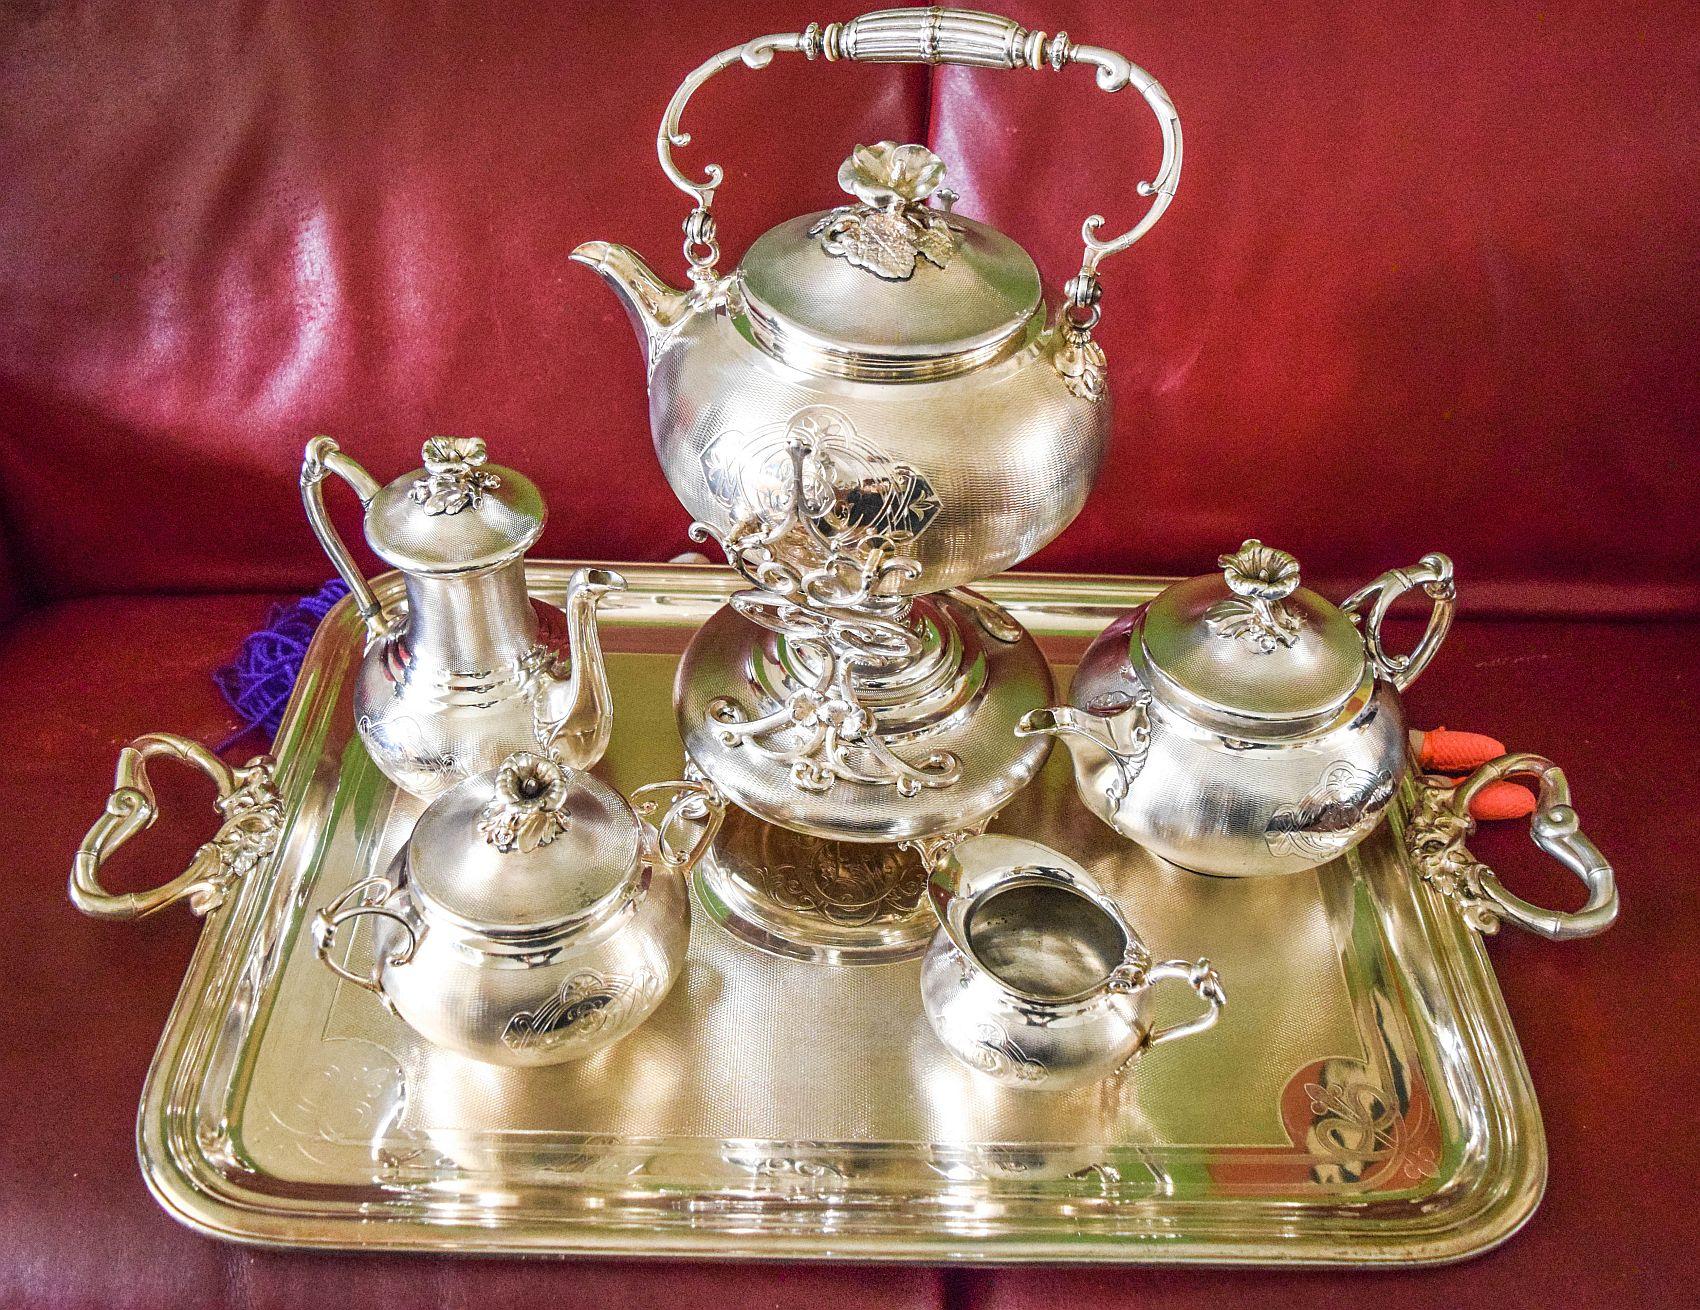 Antique 19th Century Guilloche 1890's Grand Christofle Tea set.
 Rare and beautifu lSamovar Coffee &Tea set with all over engine turned (Guilloche)
decoration.
Comes with a  very large and heavy rectangular  tray which is also with
engine  turned